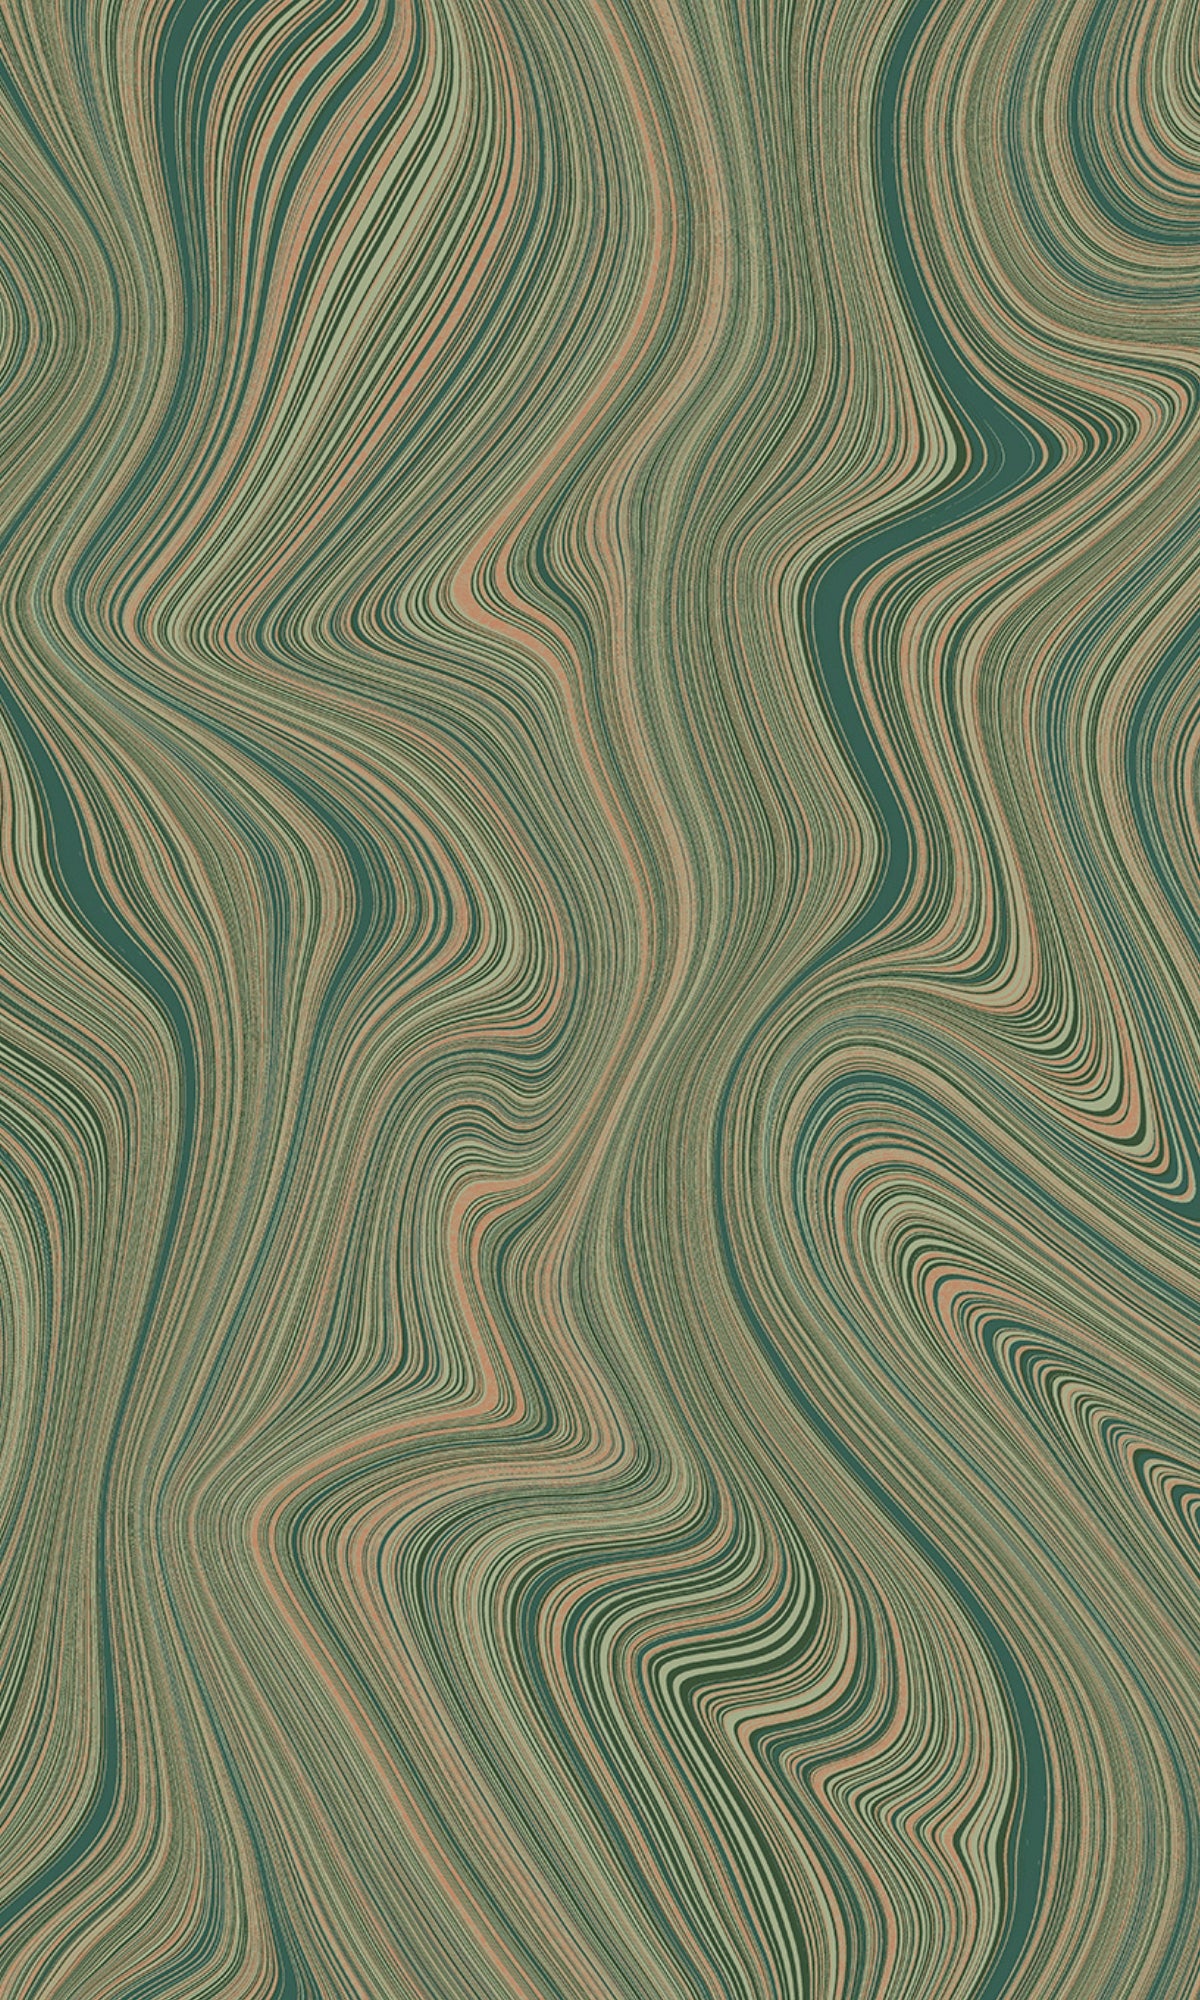 Green Abstract Geometric Curve Lines Wallpaper R9190